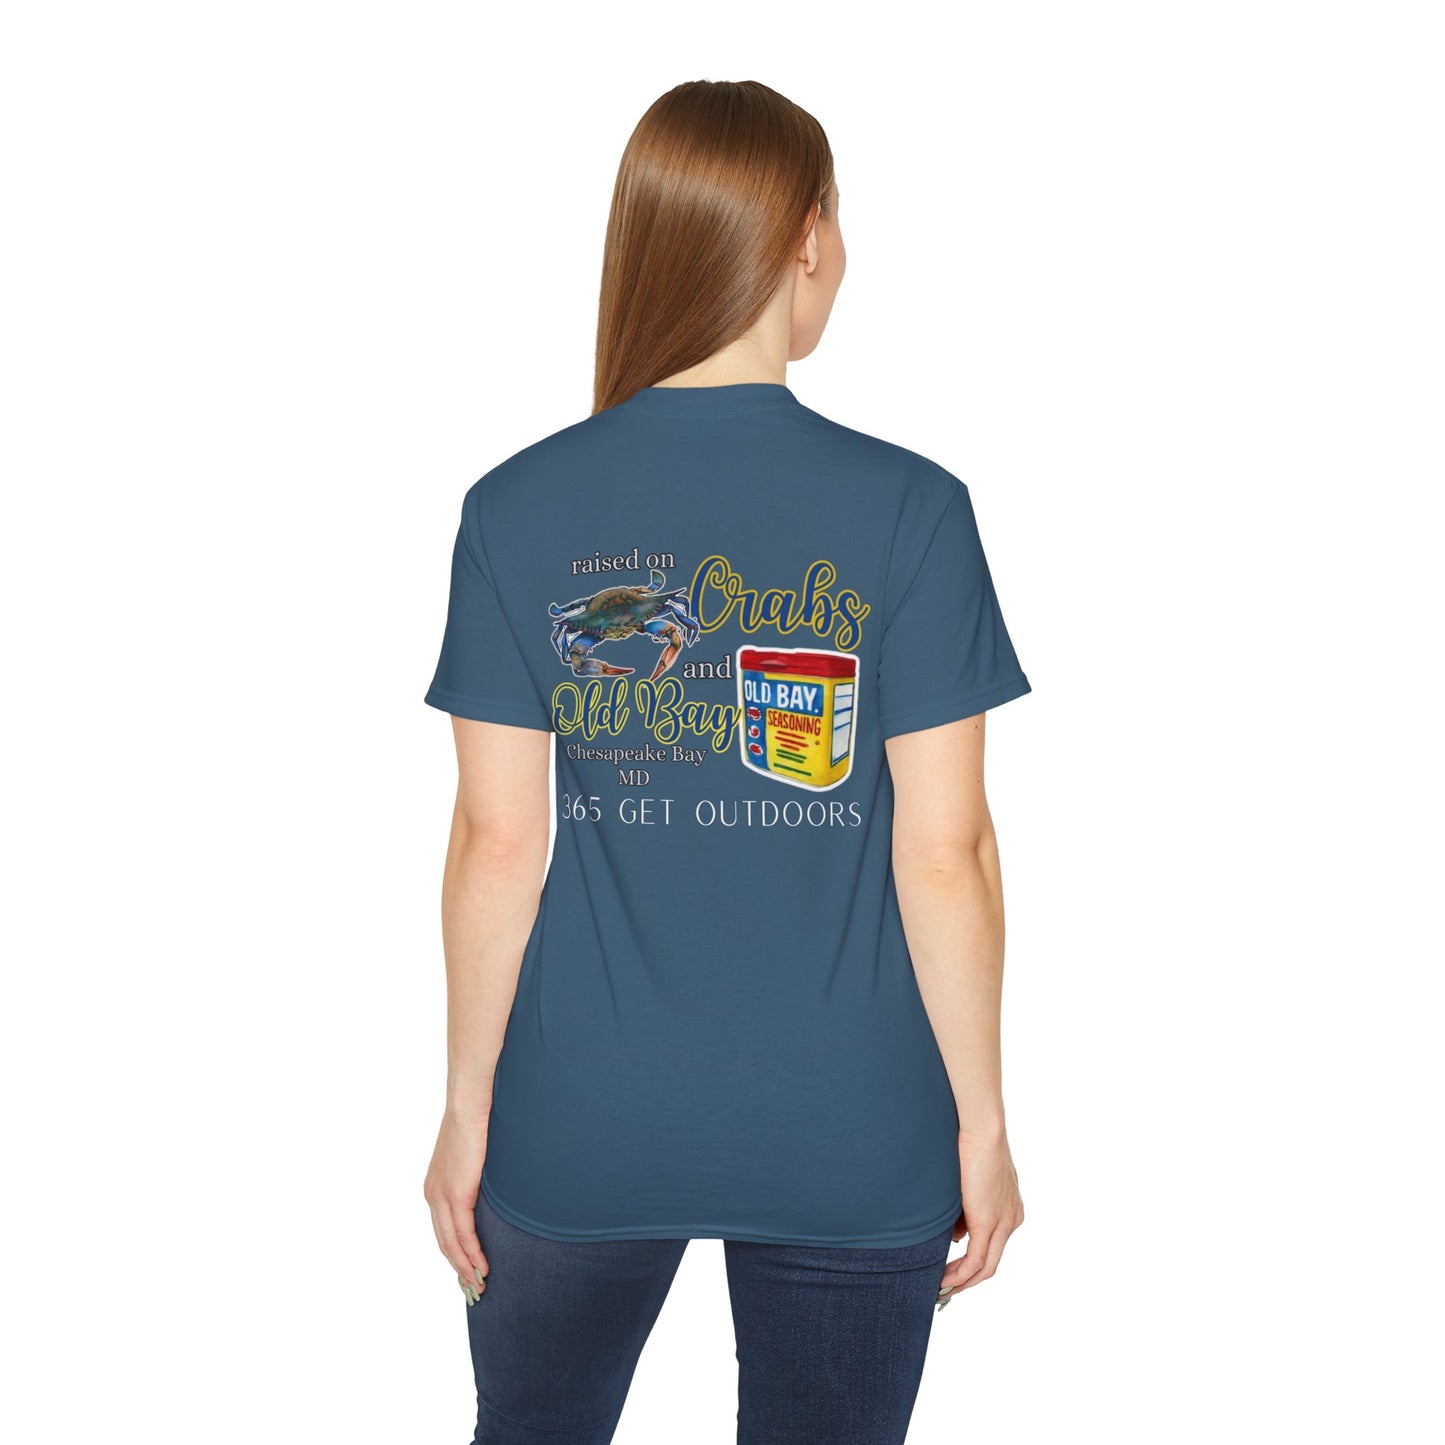 Raised on Crabs & Old Bay T-Shirt